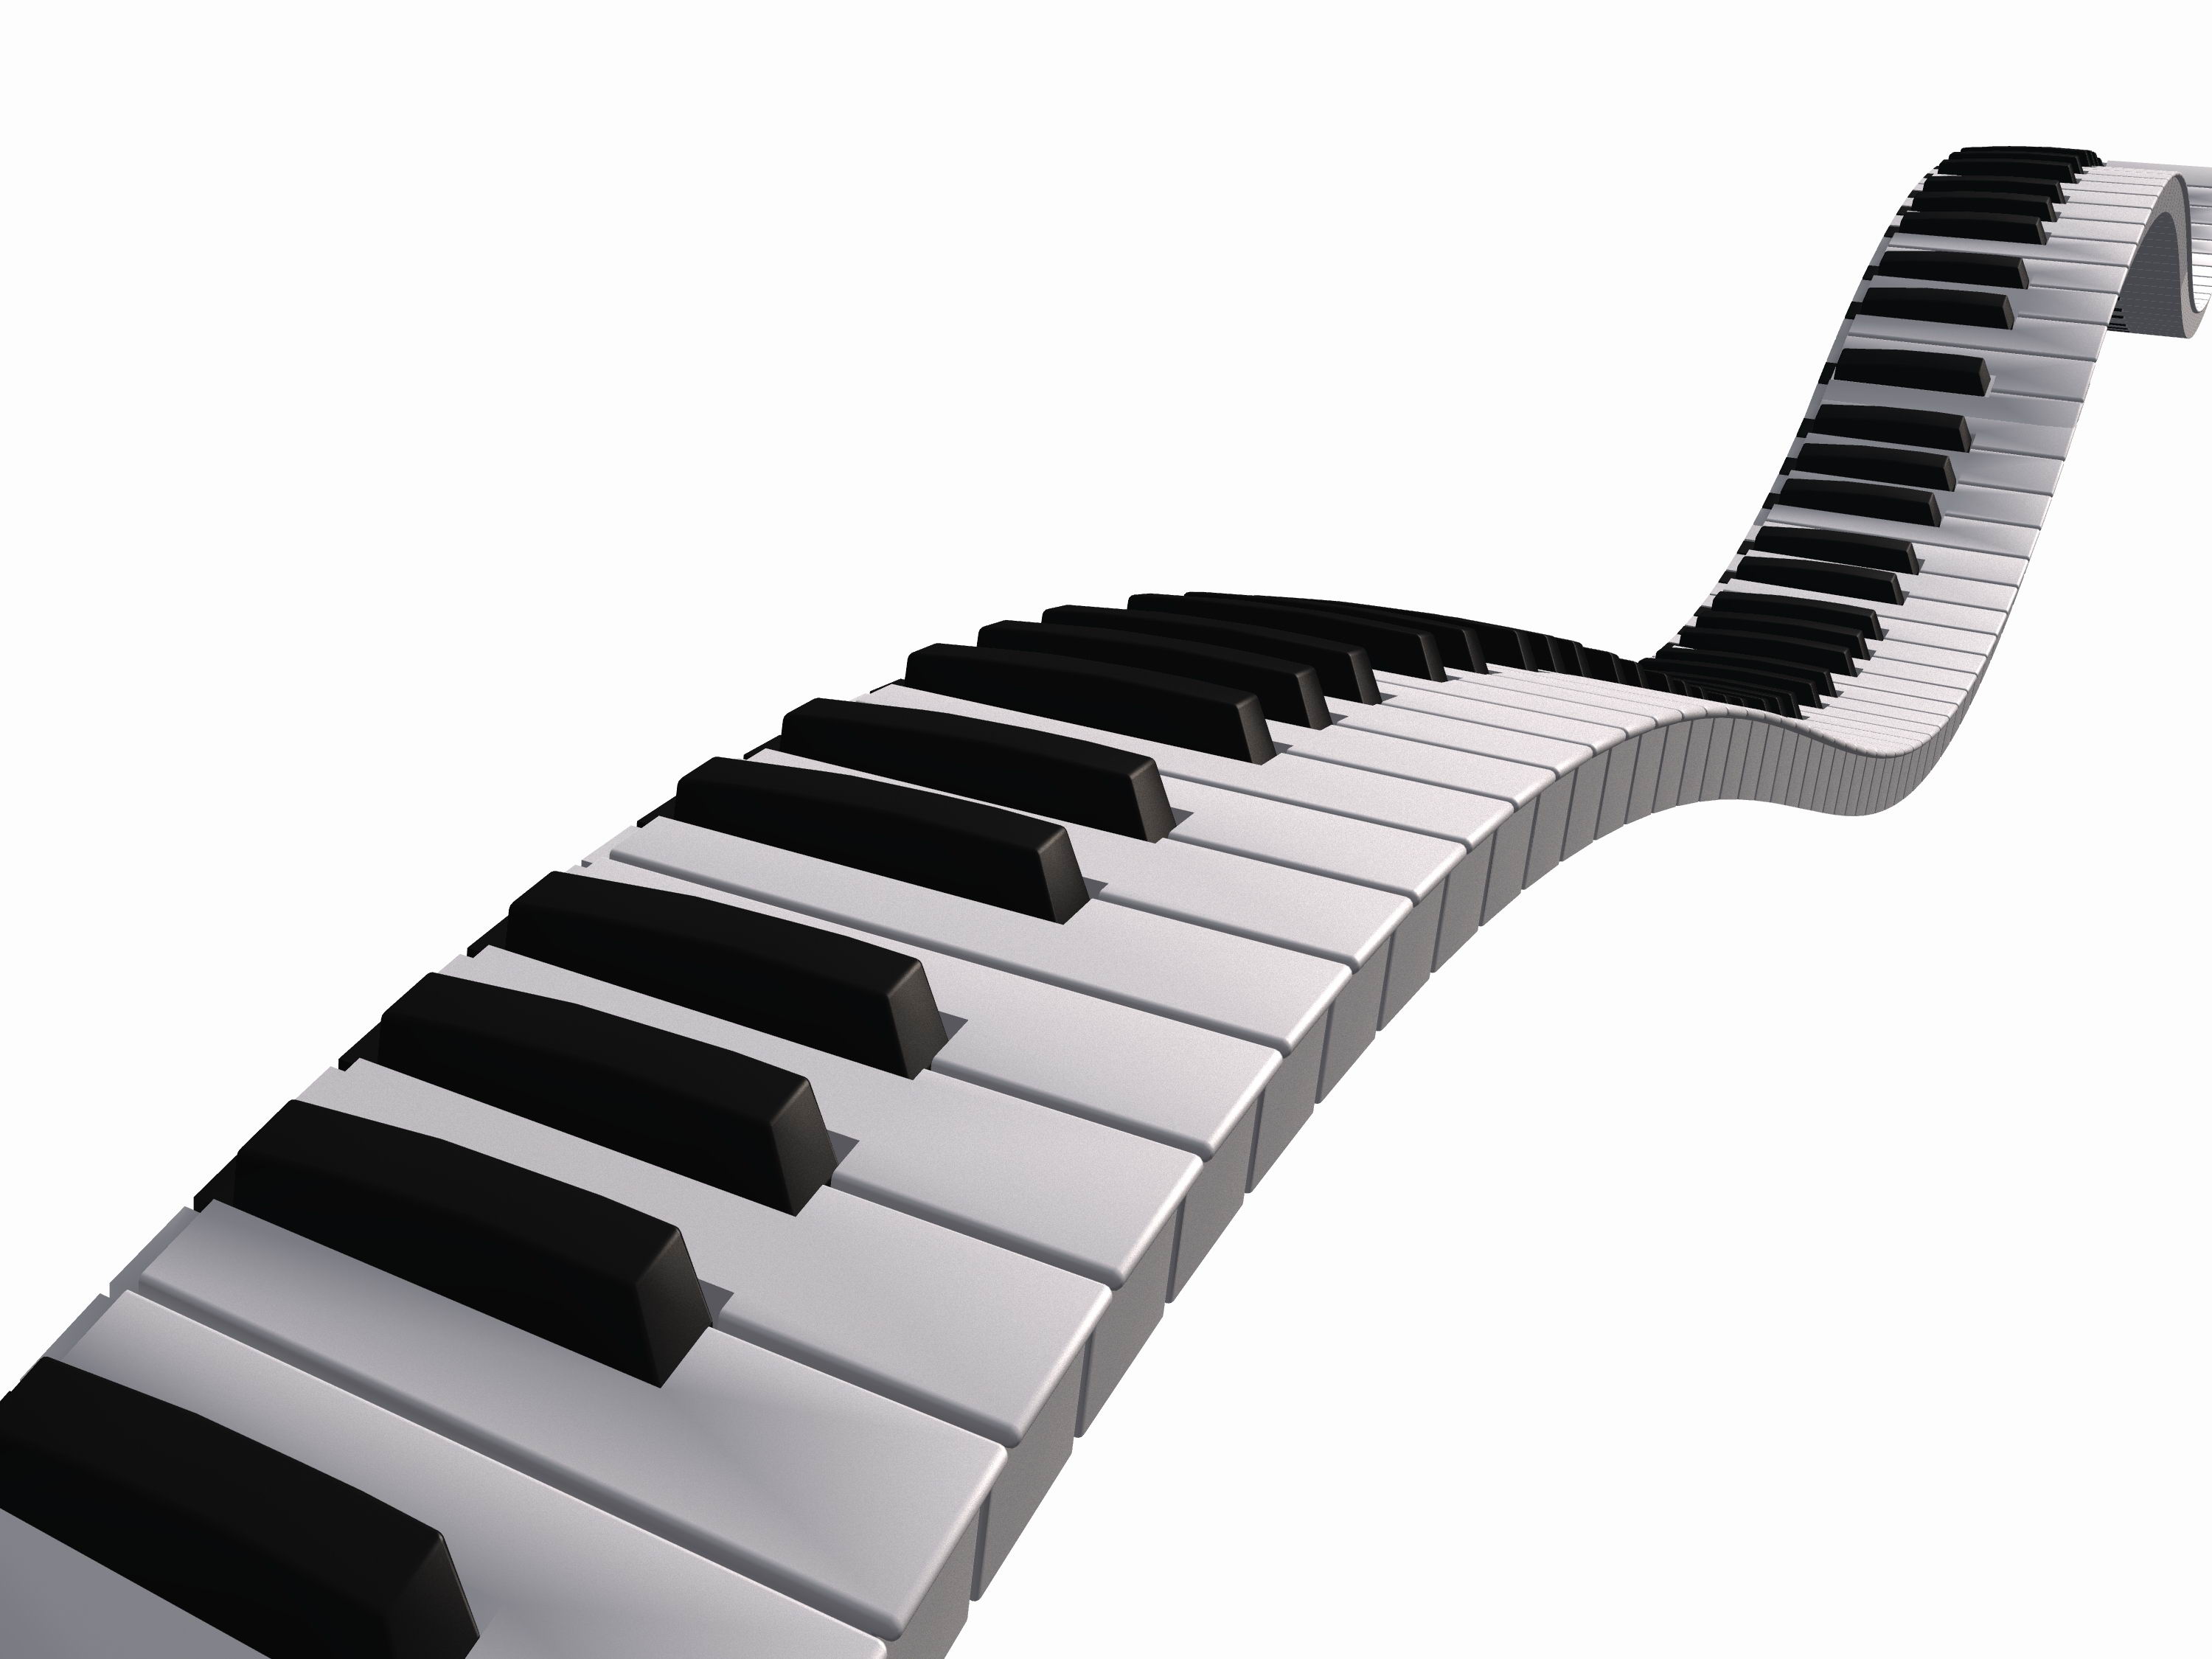 Wavy Piano Keys Clipart | Clipart library - Free Clipart Images